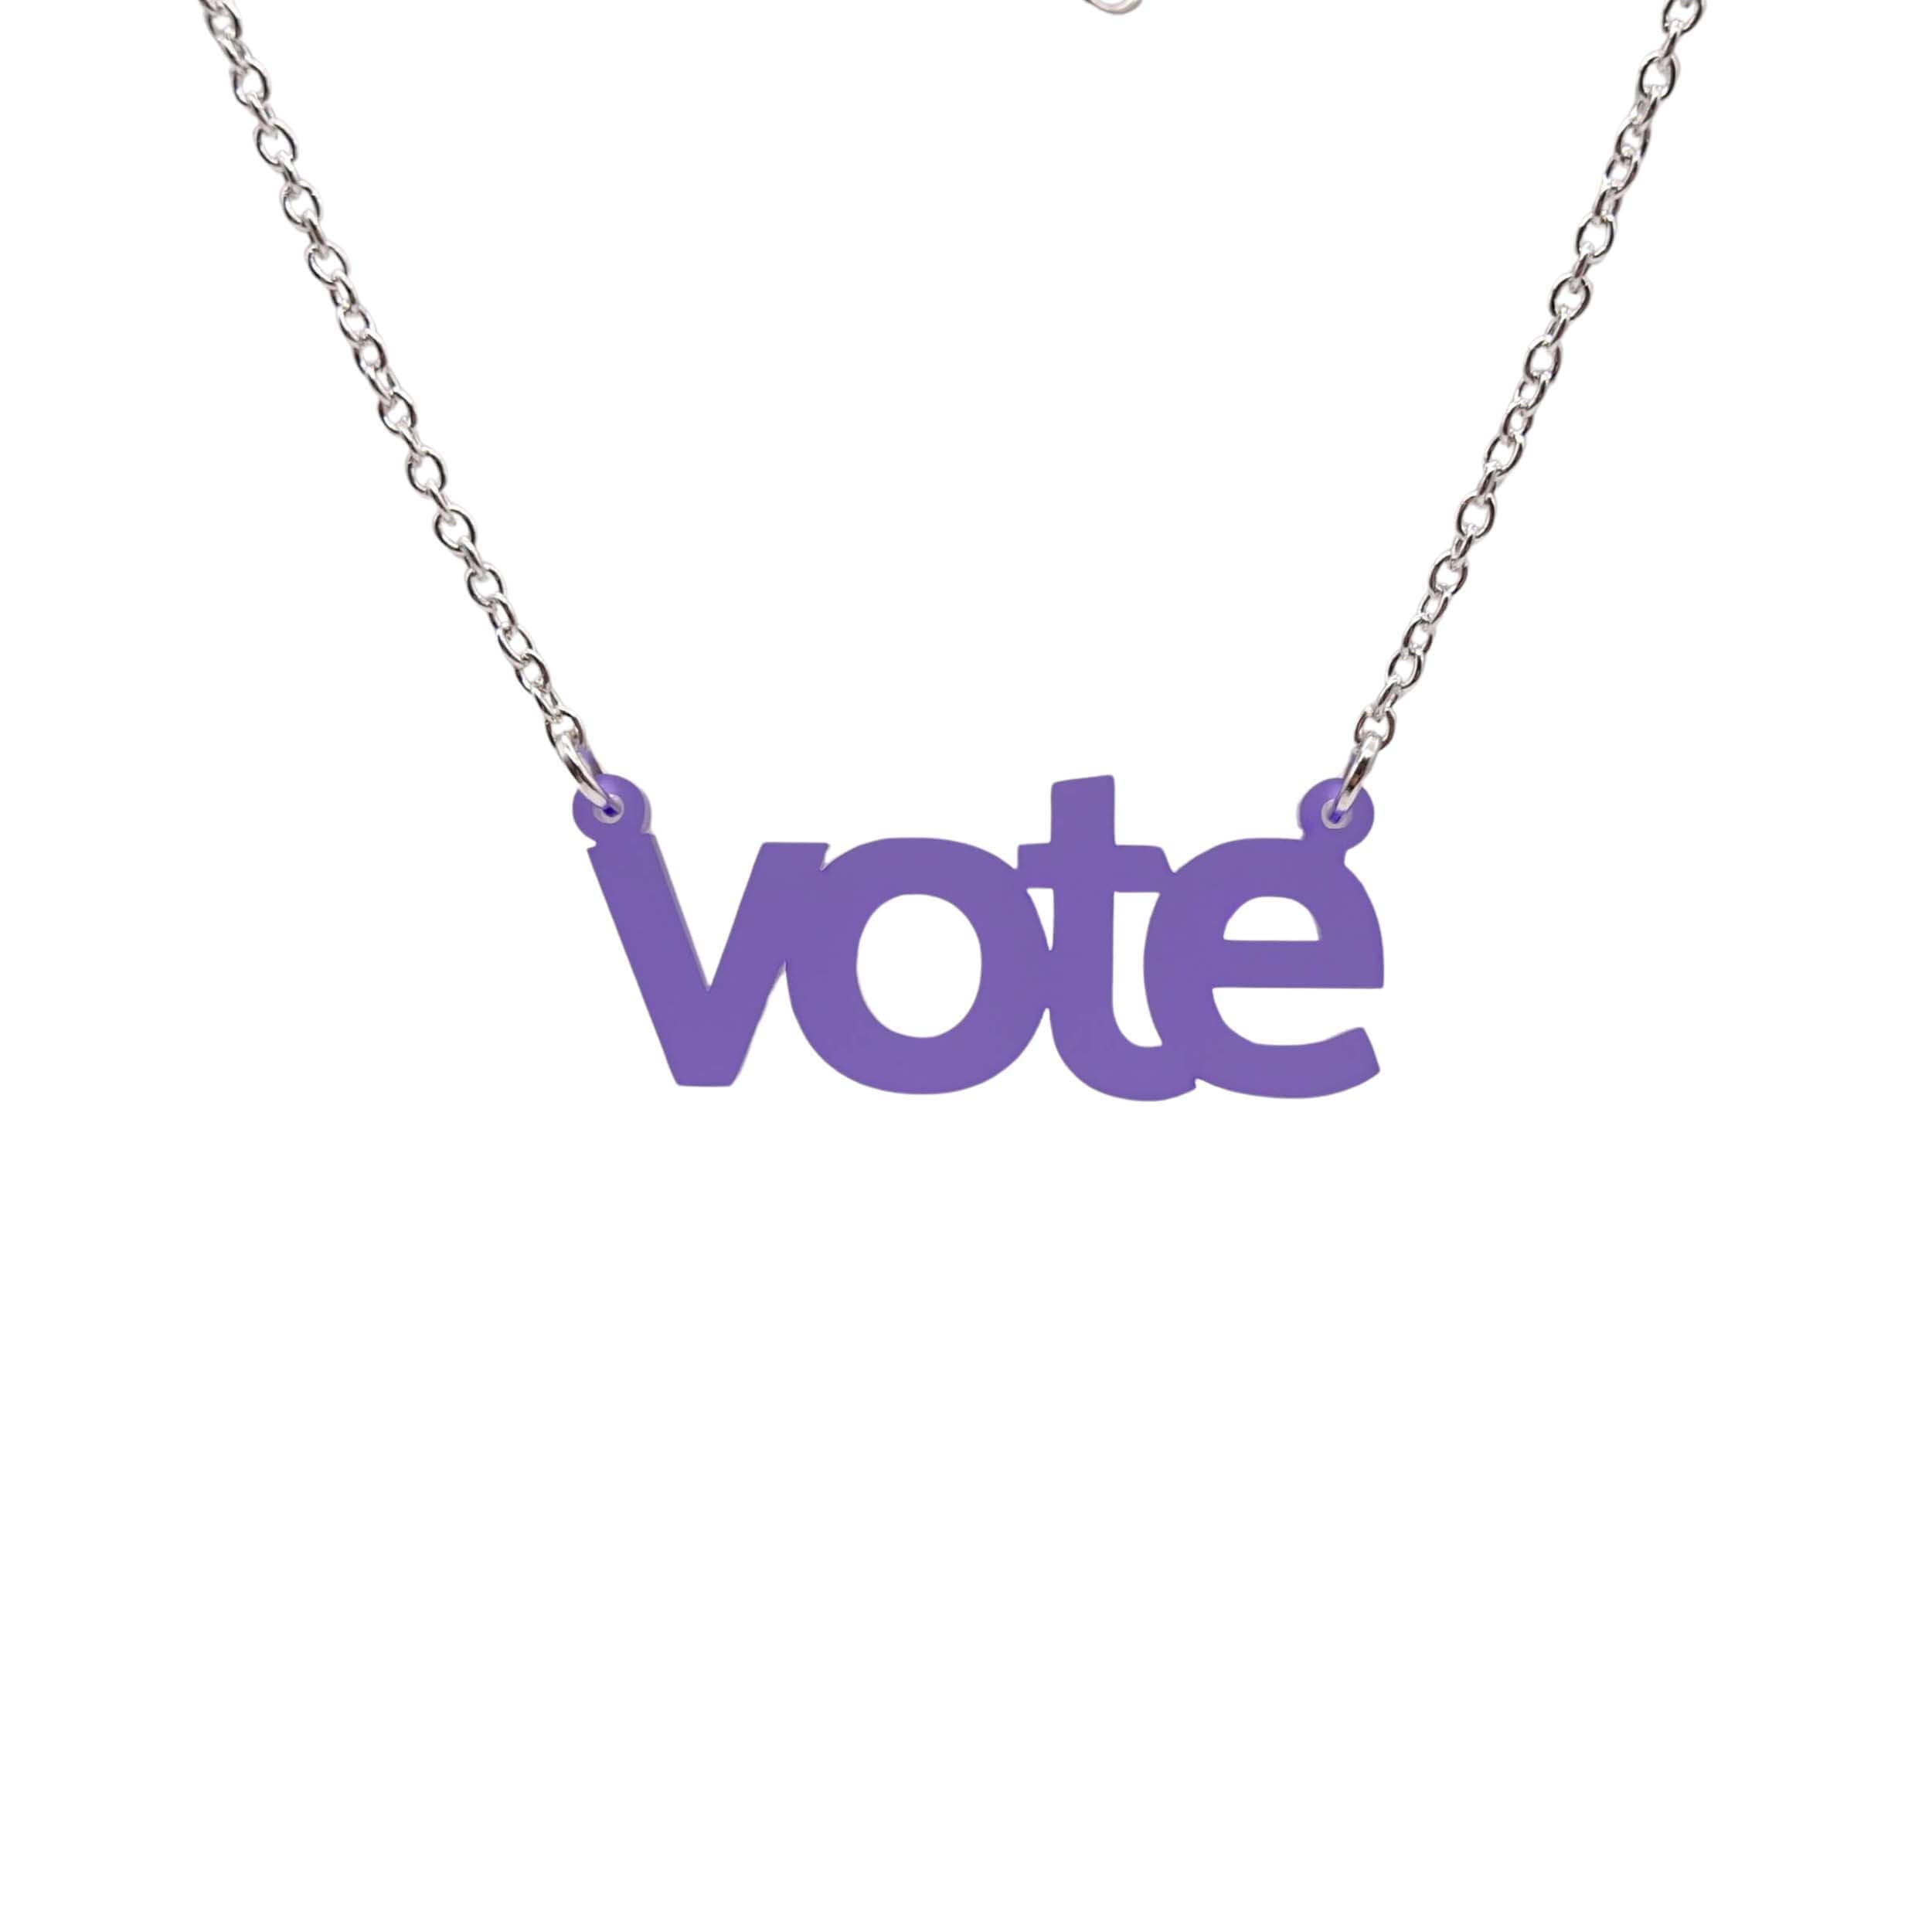 Vote necklace in violet frost shown hanging against a white background. 